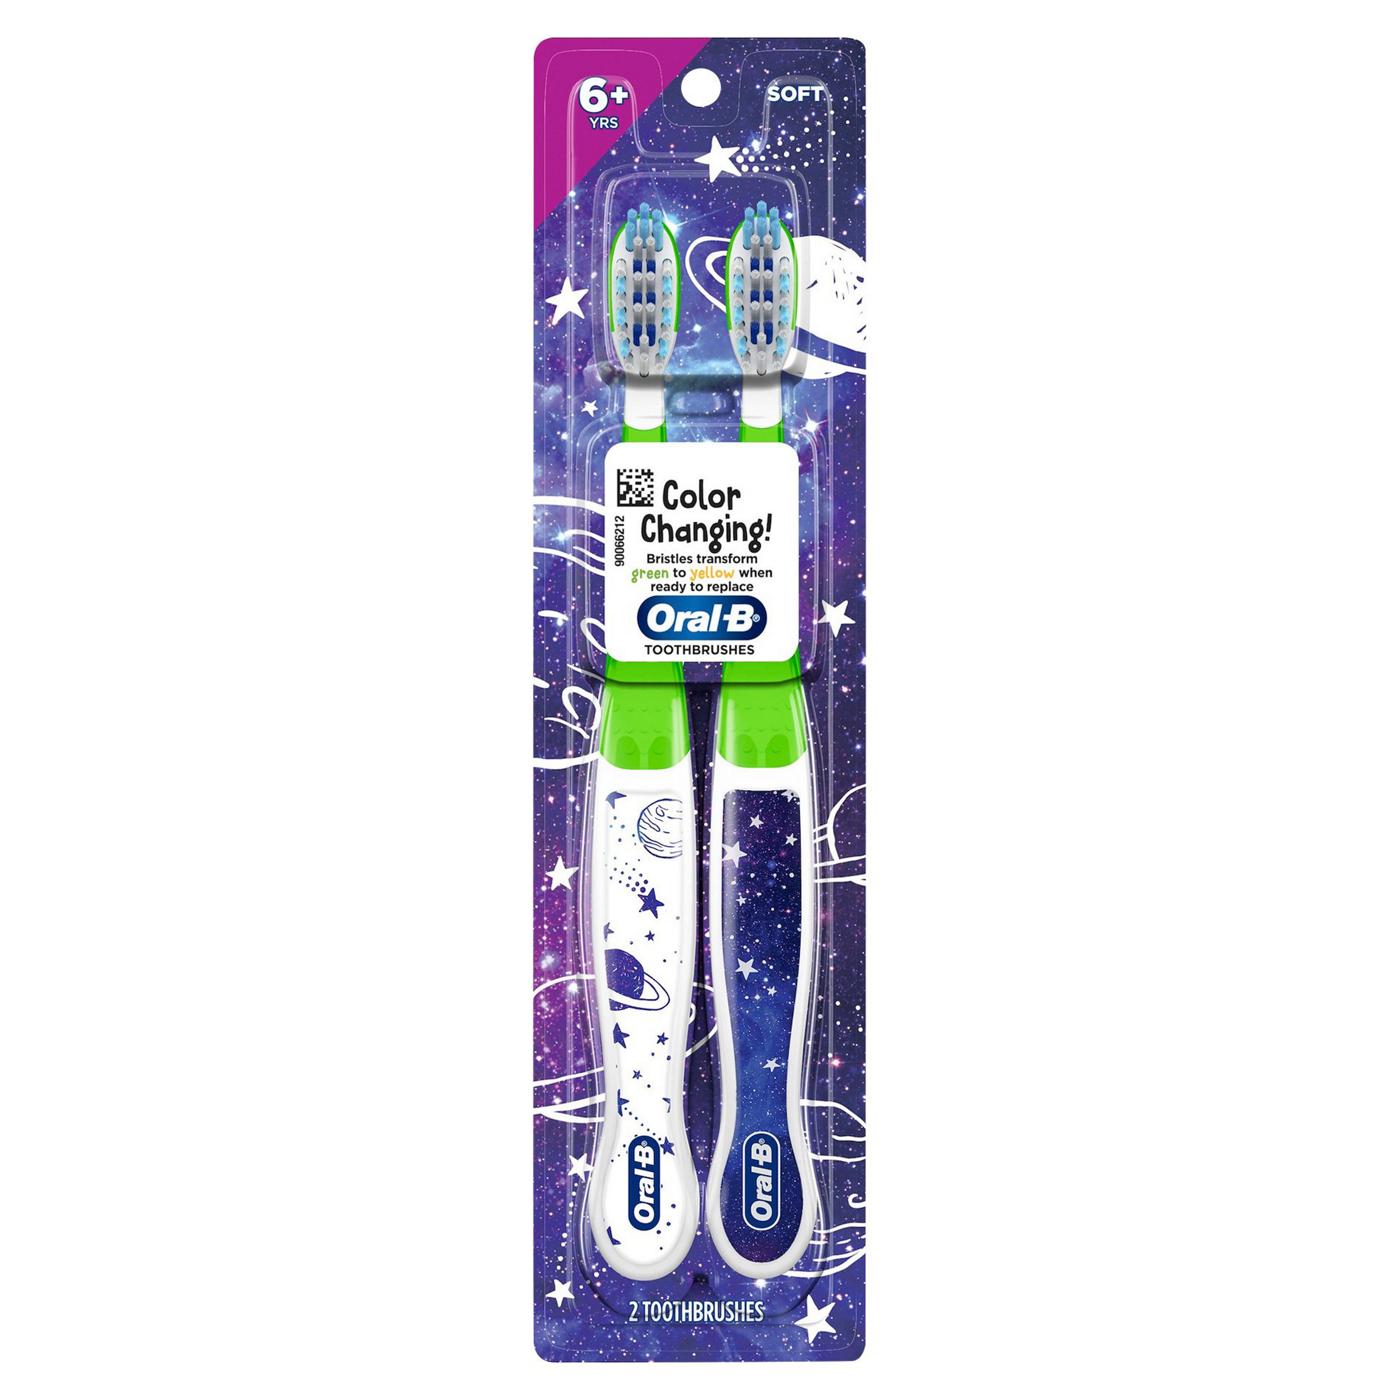 Oral-B Color Changing Soft Toothbrushes; image 1 of 9